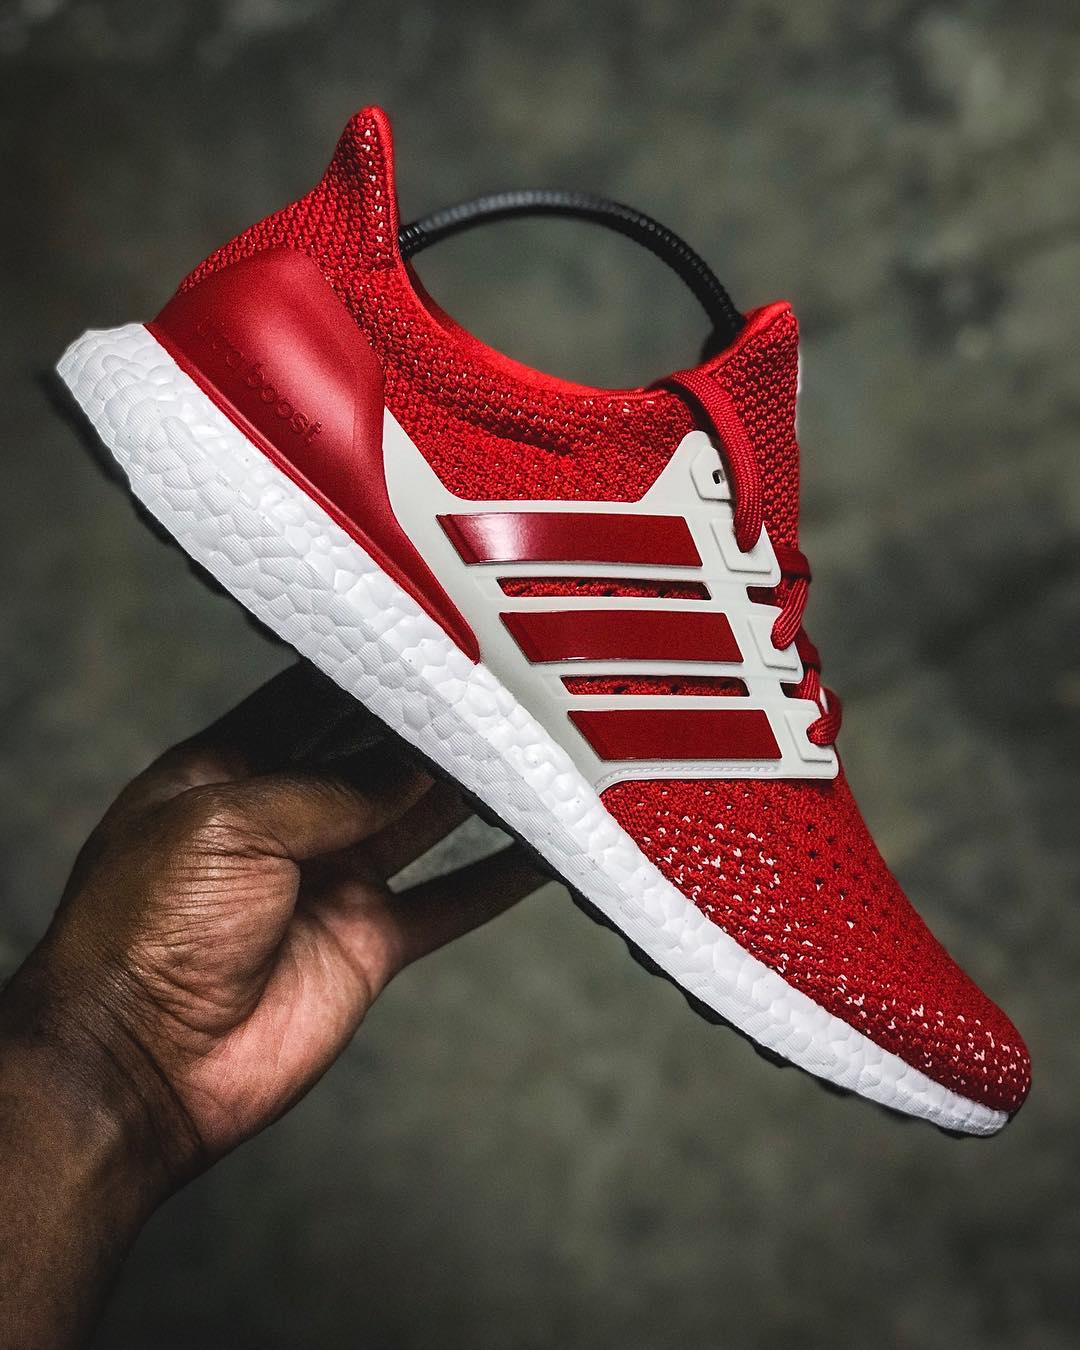 miAdidas Ultra Boost Clima Candy Apple